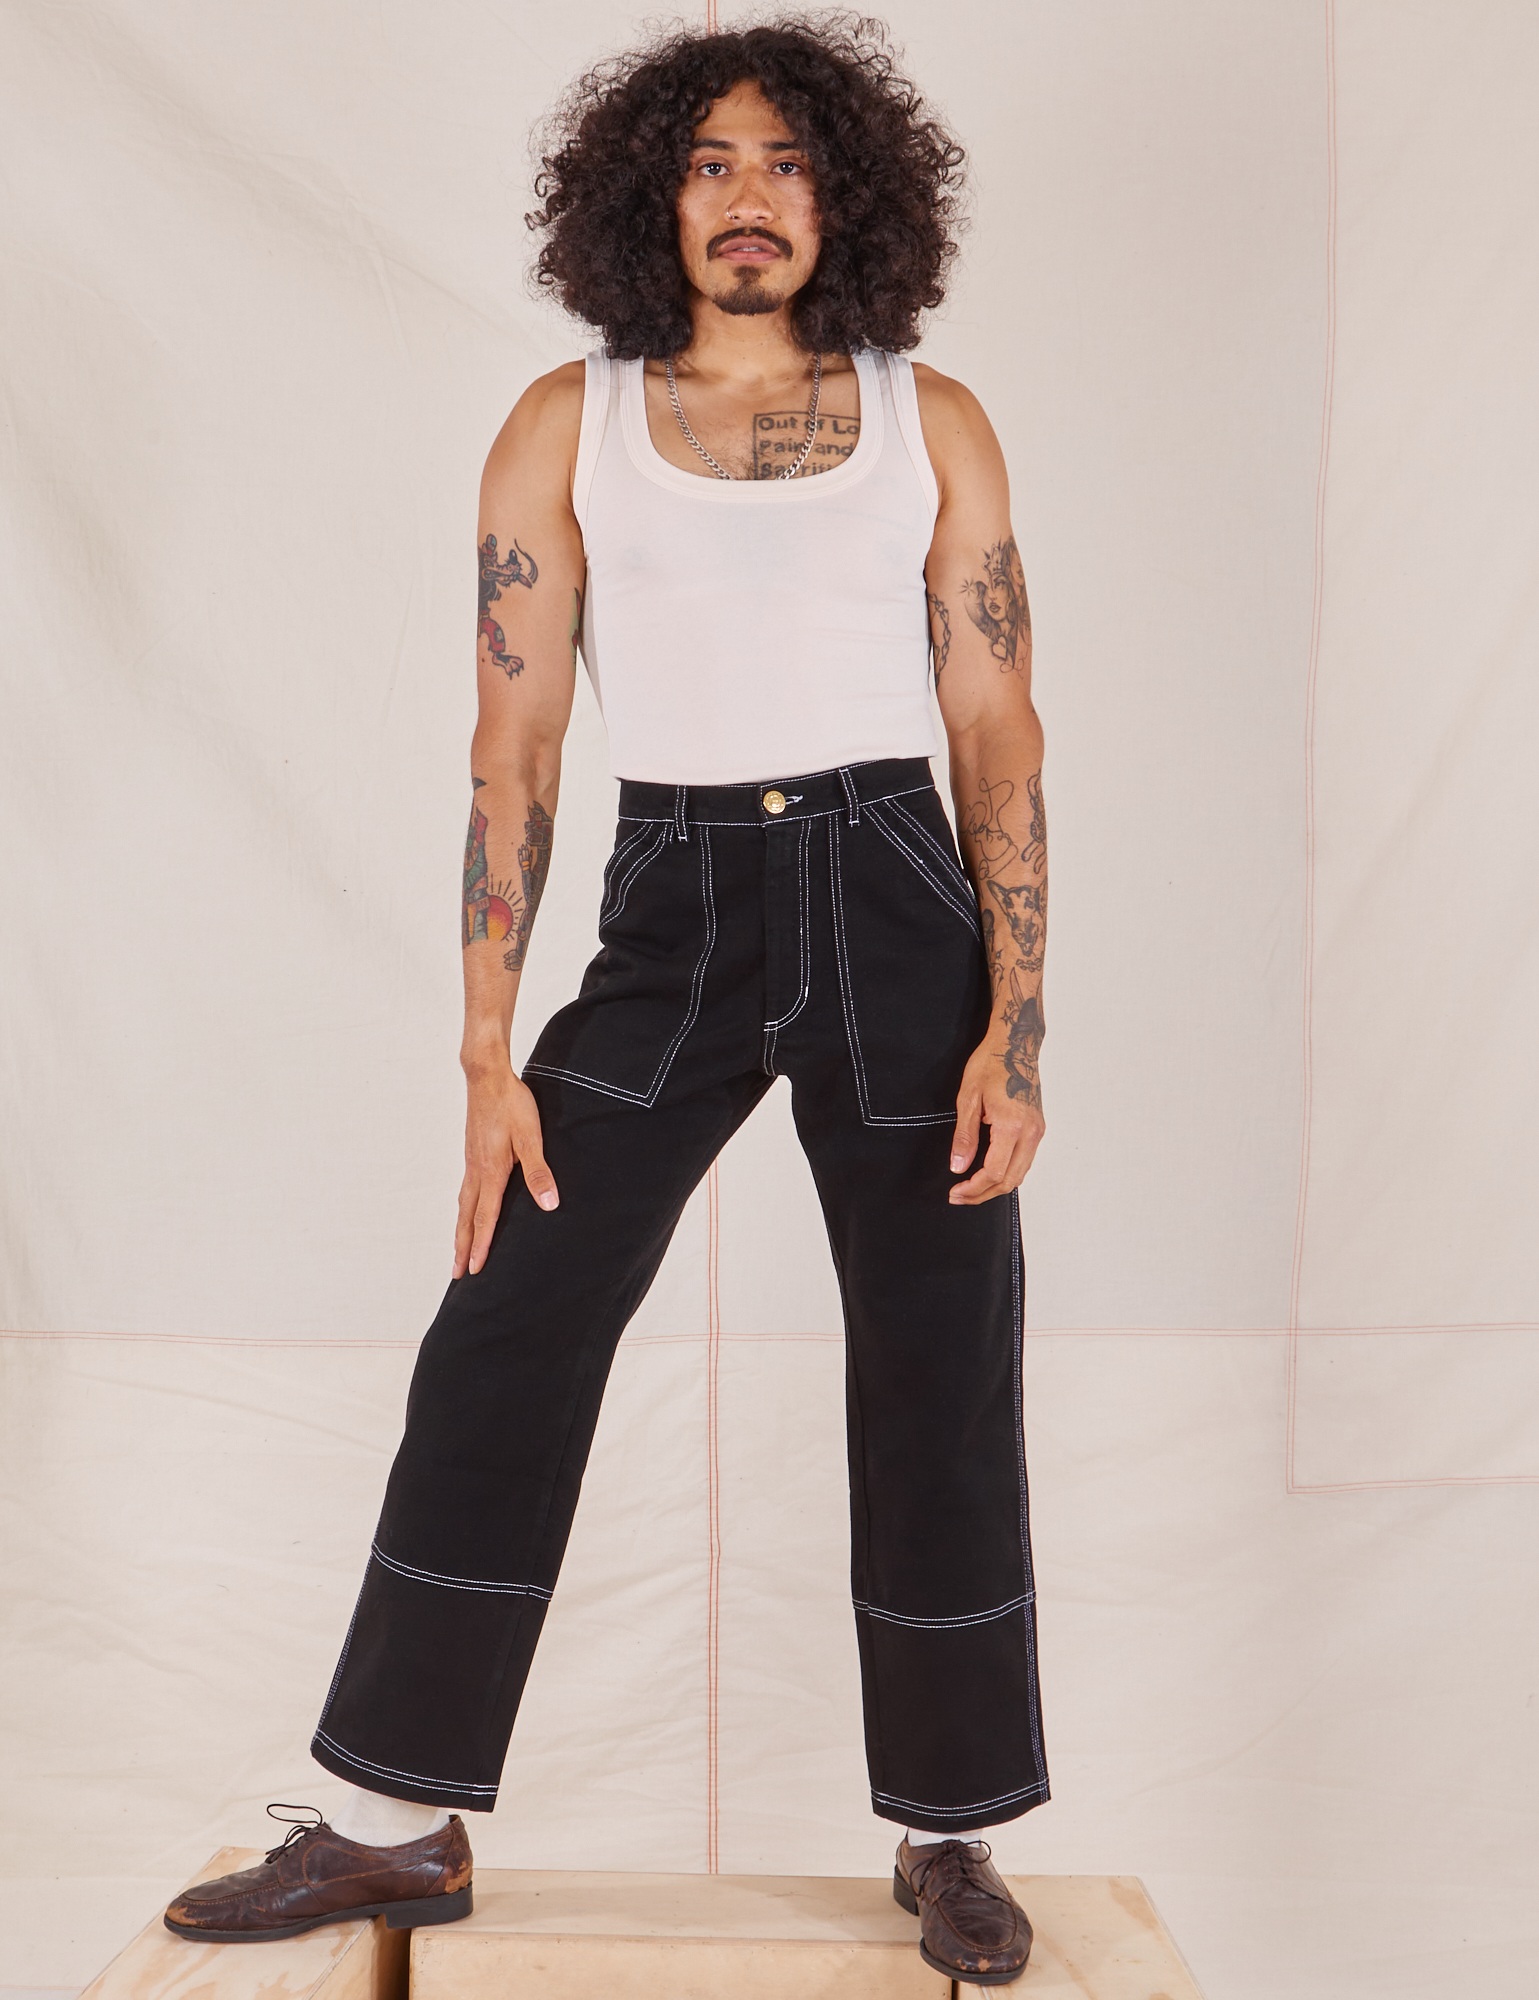 Jesse is 5&#39;8&quot; and wearing XS Carpenter Jeans in Black paired with a Tank Top in vintage tee off-white